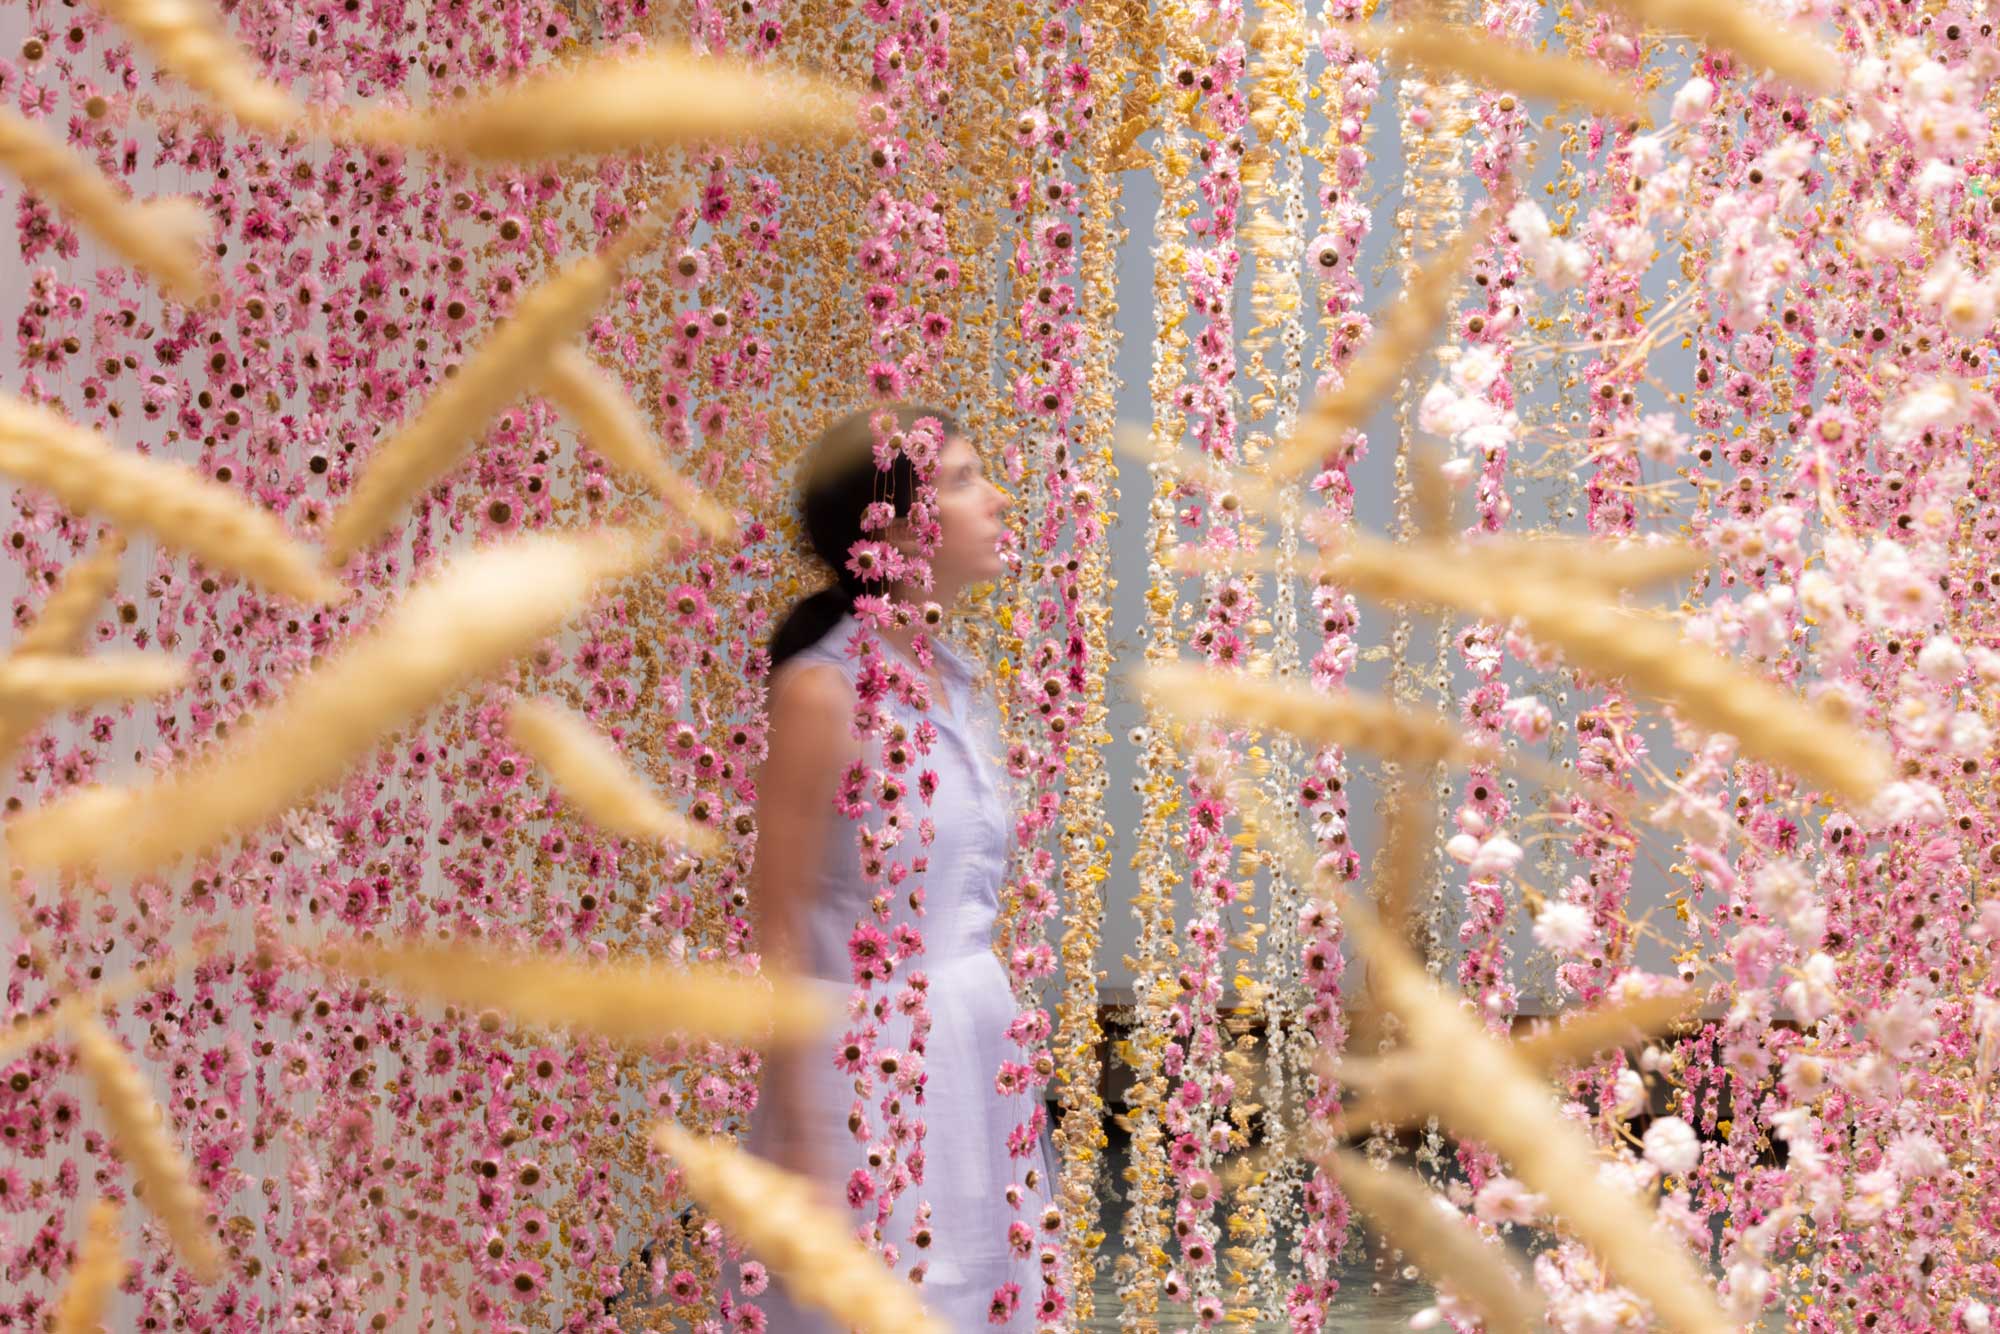 An installation by Rebecca Louise Law made of thousands of fried flowers suspended from the ceiling and a person standing amongst them.